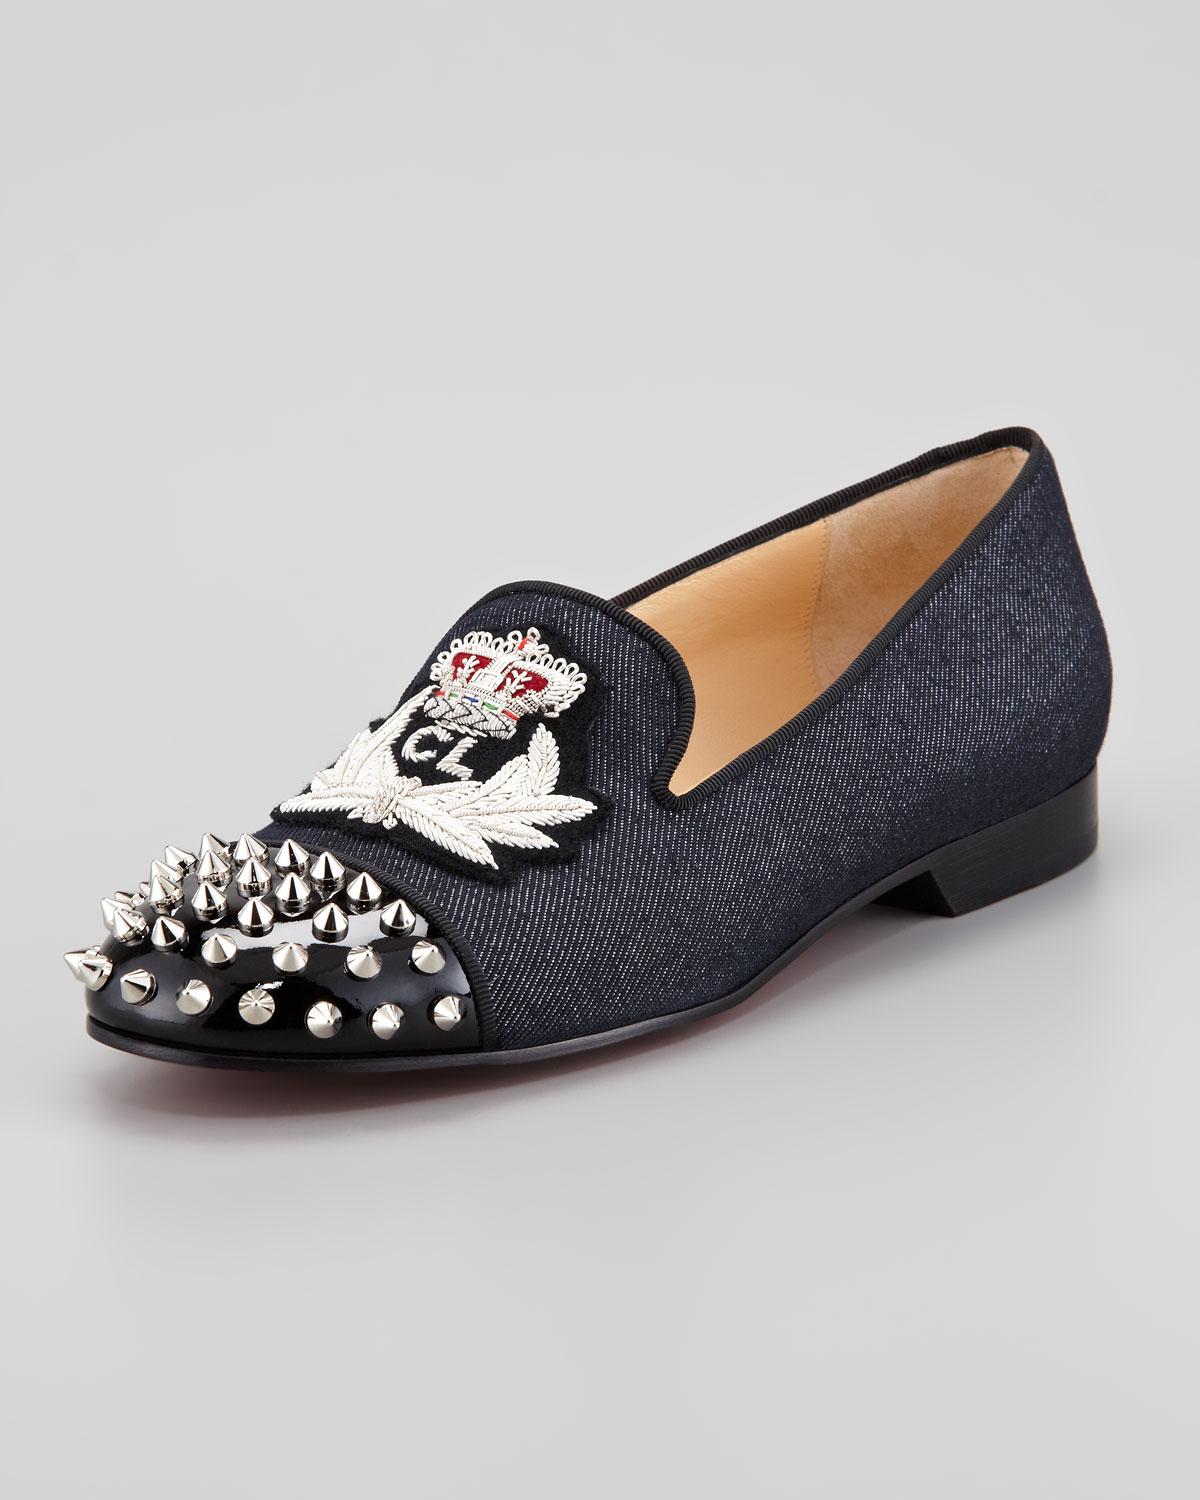 Christian louboutin Intern Spiked Captoe Denim Red Sole Loafer in ...